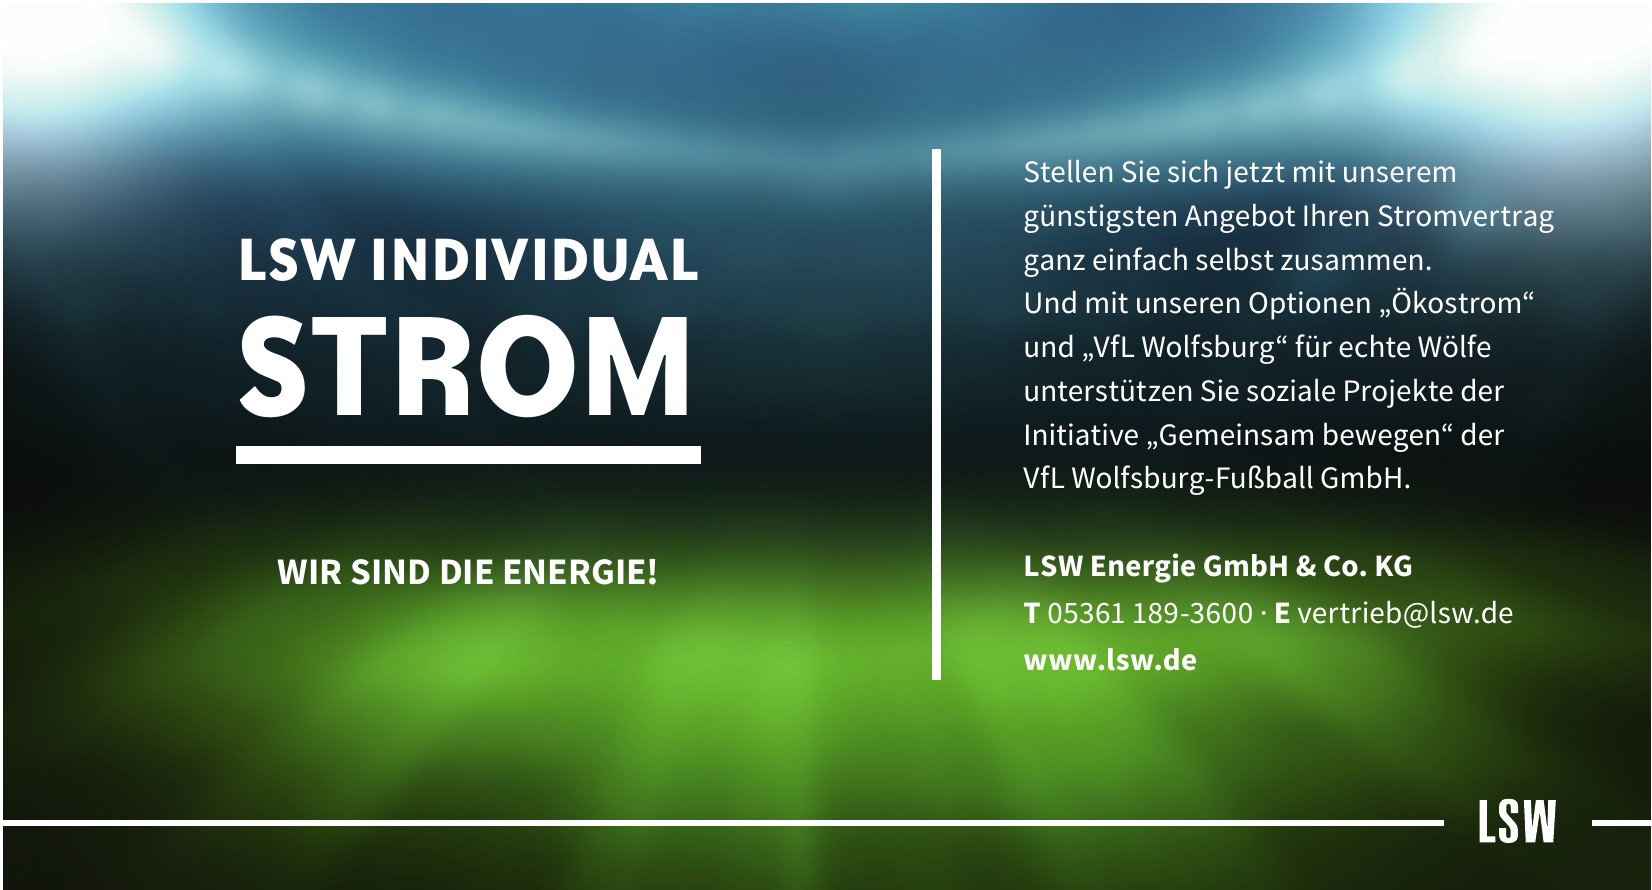 LSW Energie GmbH & Co. KG